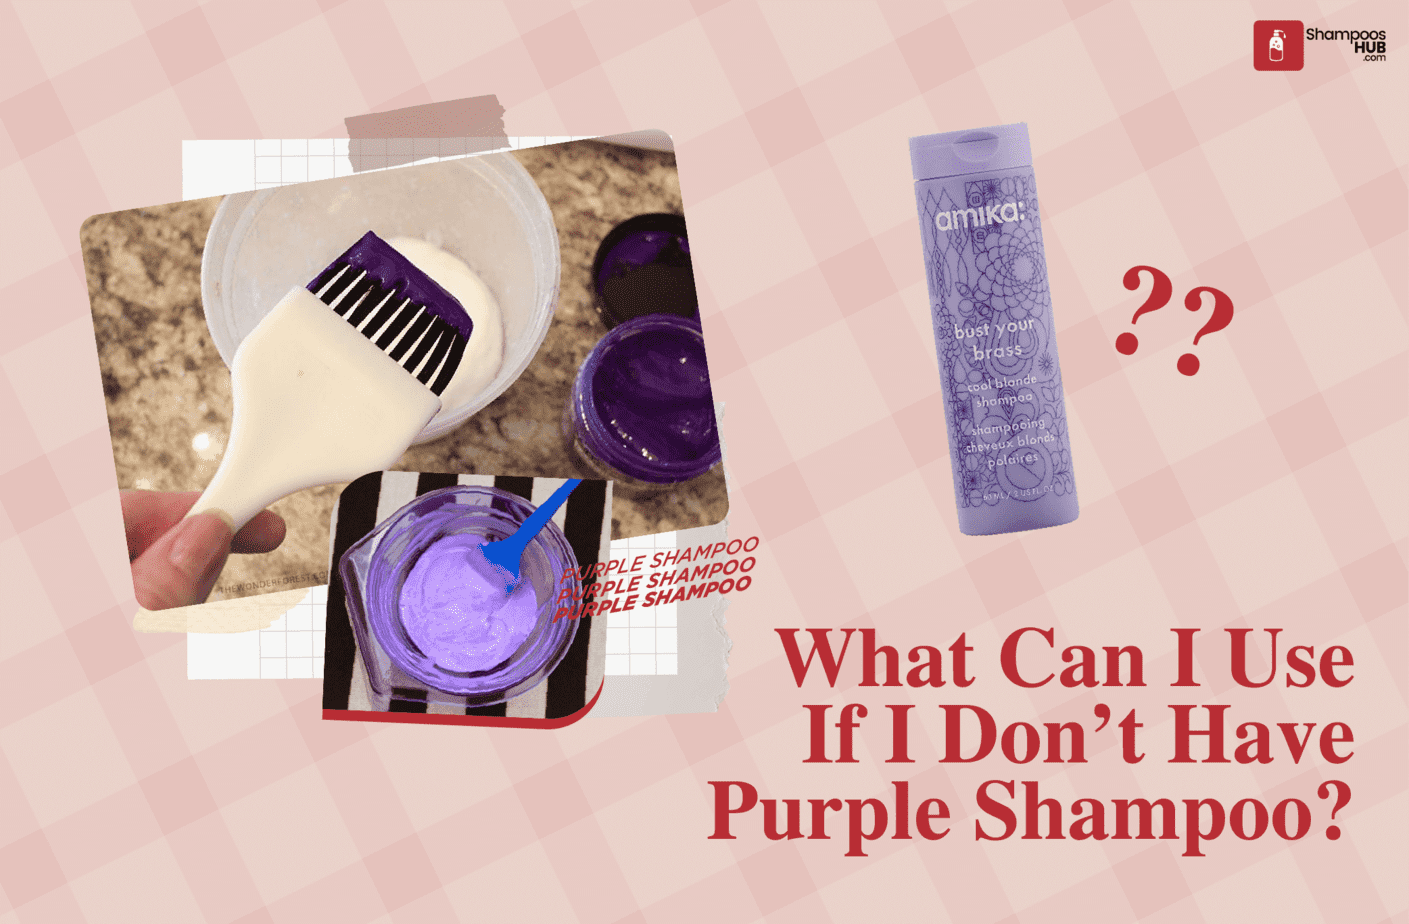 What Can I Use If I Don’t Have Purple Shampoo?